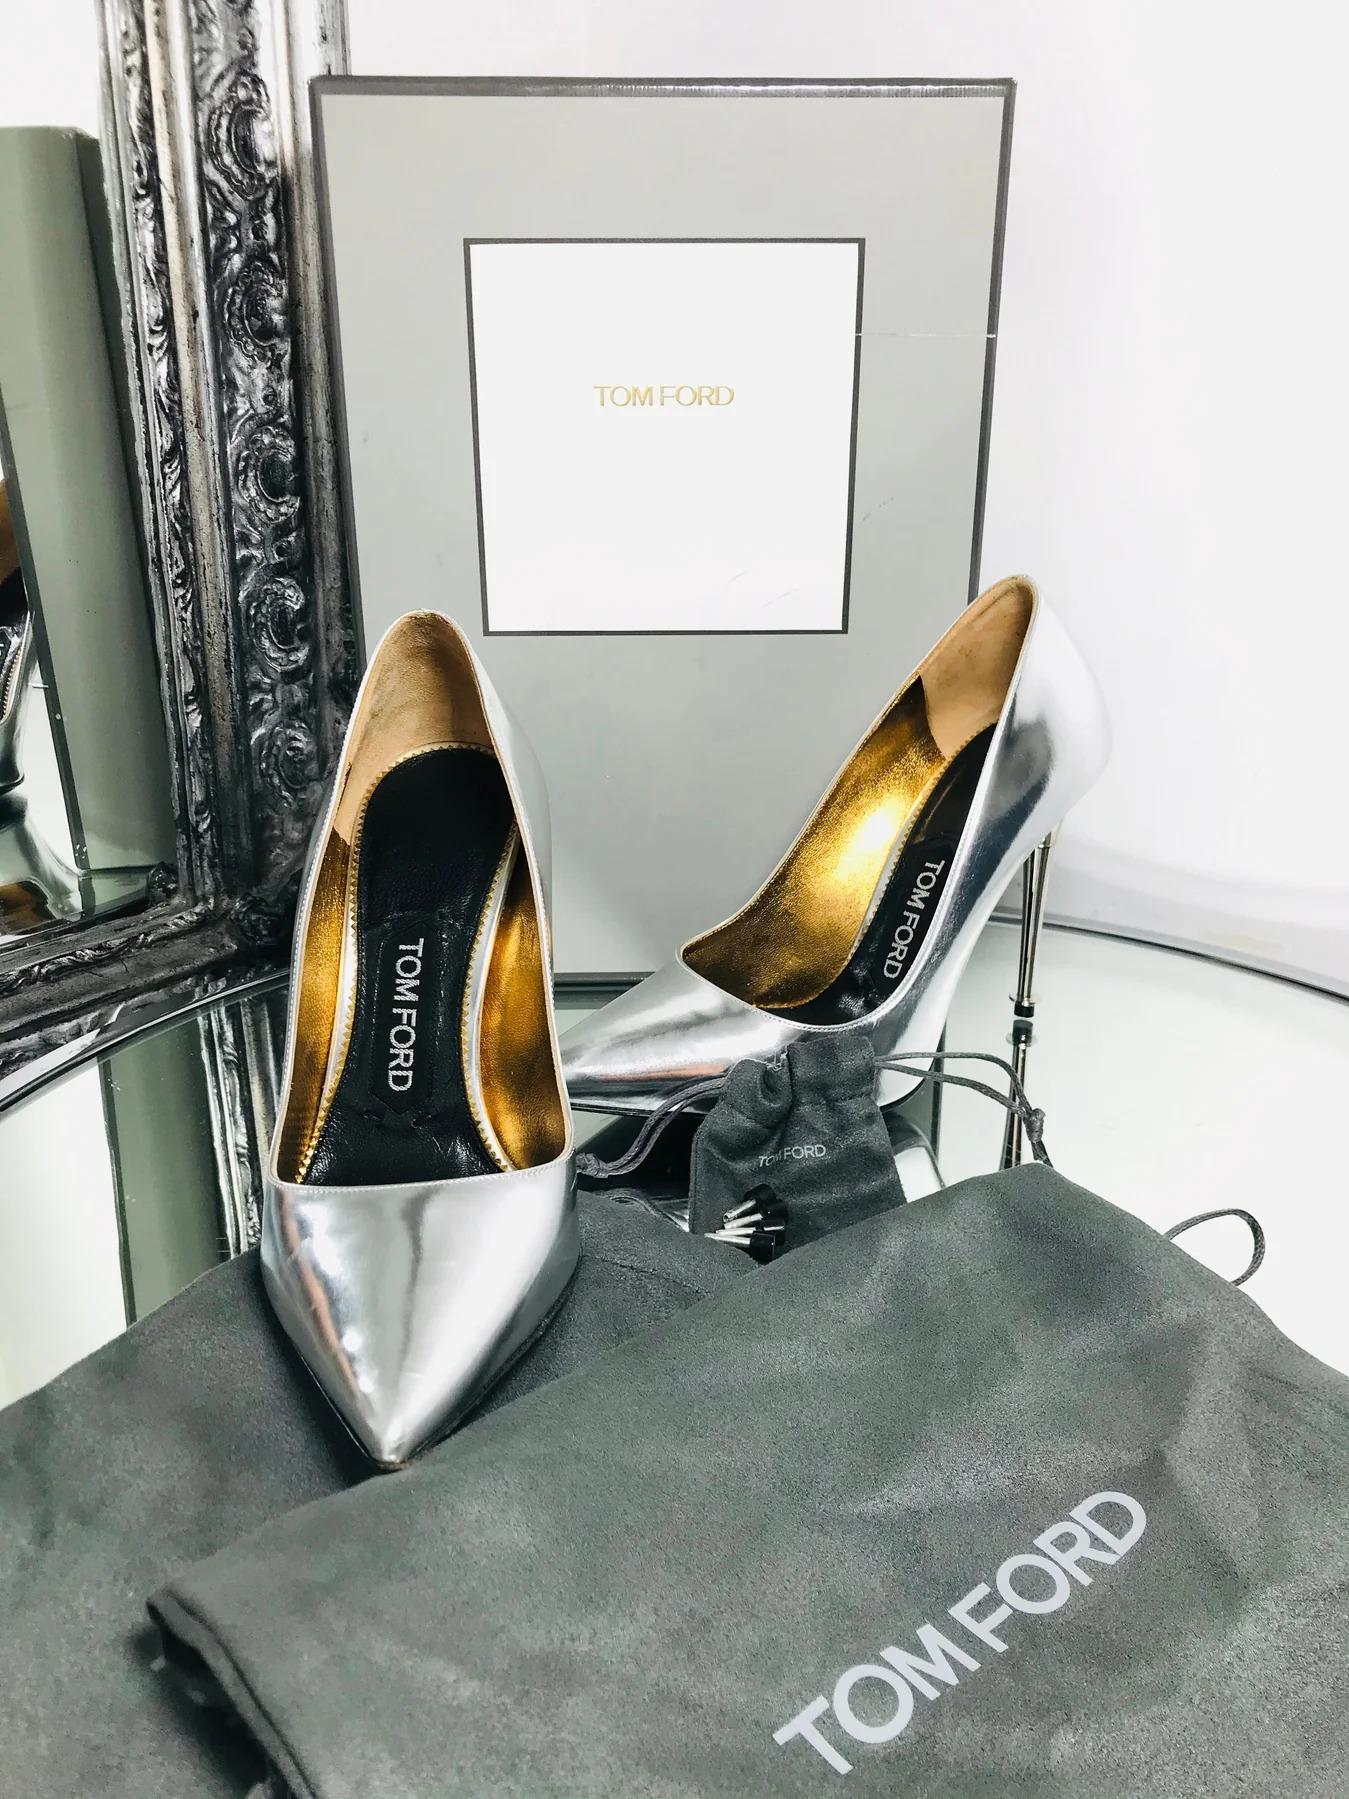 Tom Ford Metallic Leather Pumps For Sale 2